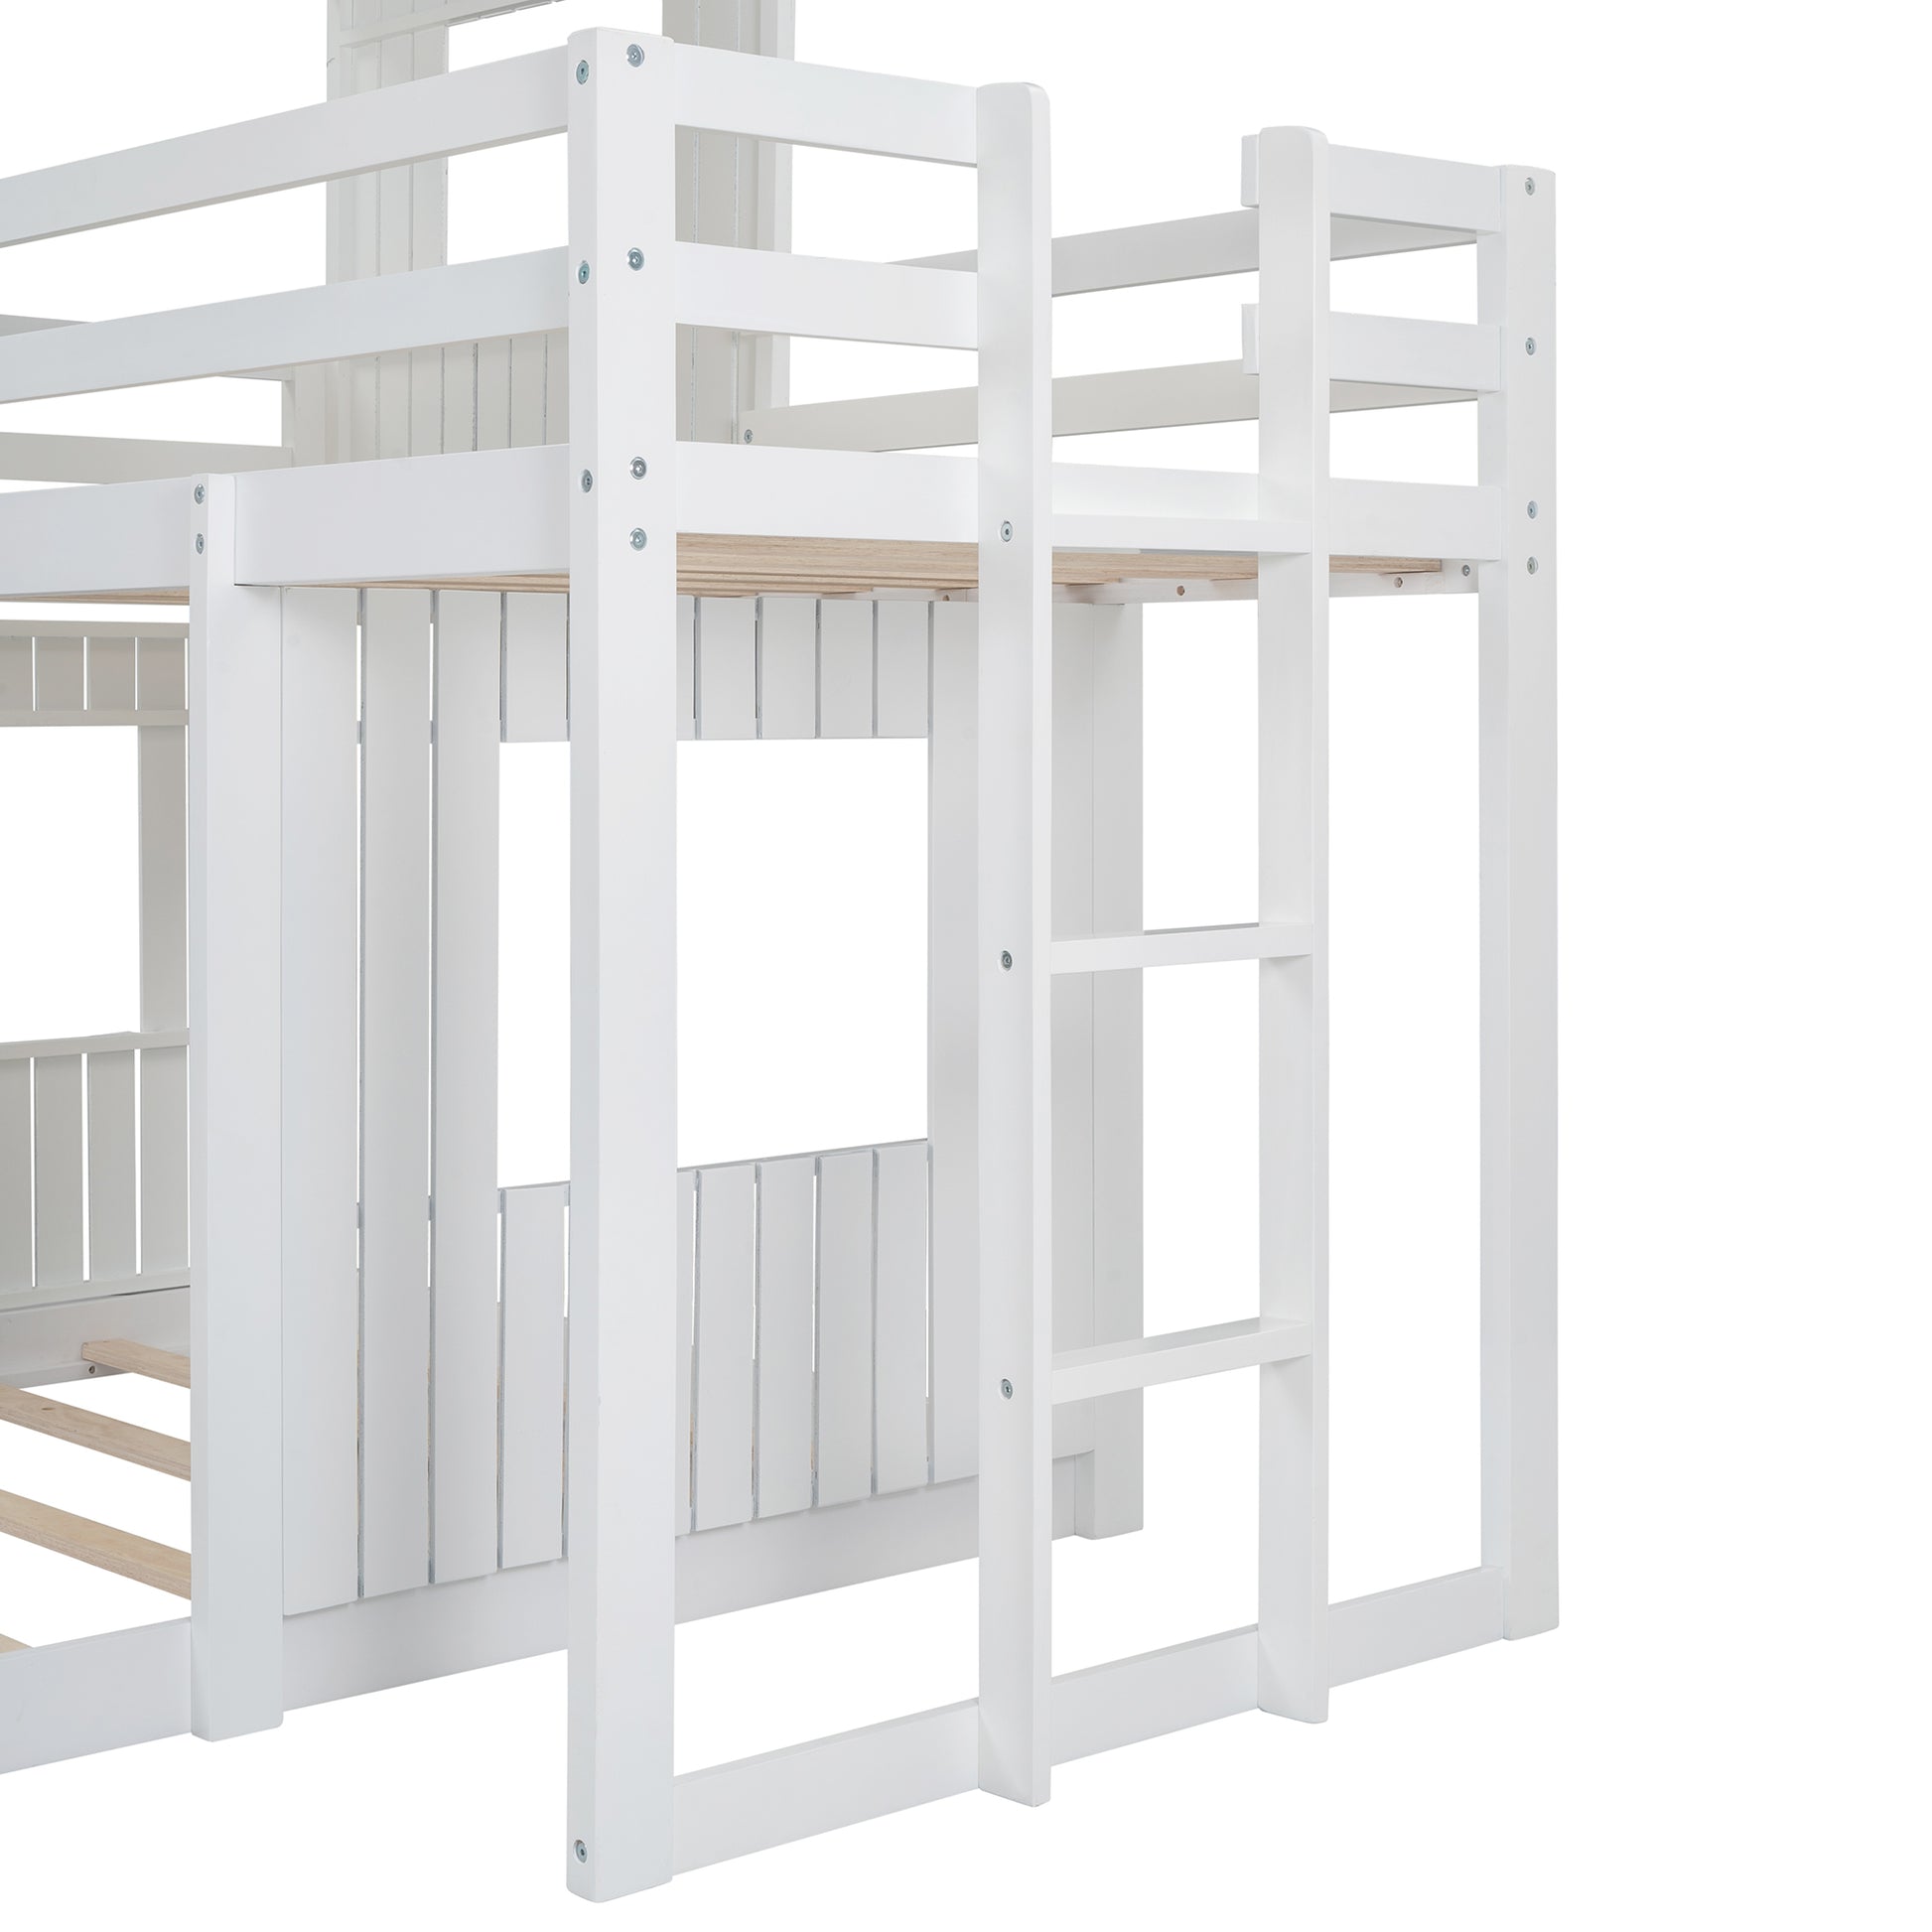 Wooden Twin Over Full Bunk Bed, Loft Bed with Playhouse, Farmhouse, Ladder and Guardrails, White - Enova Luxe Home Store